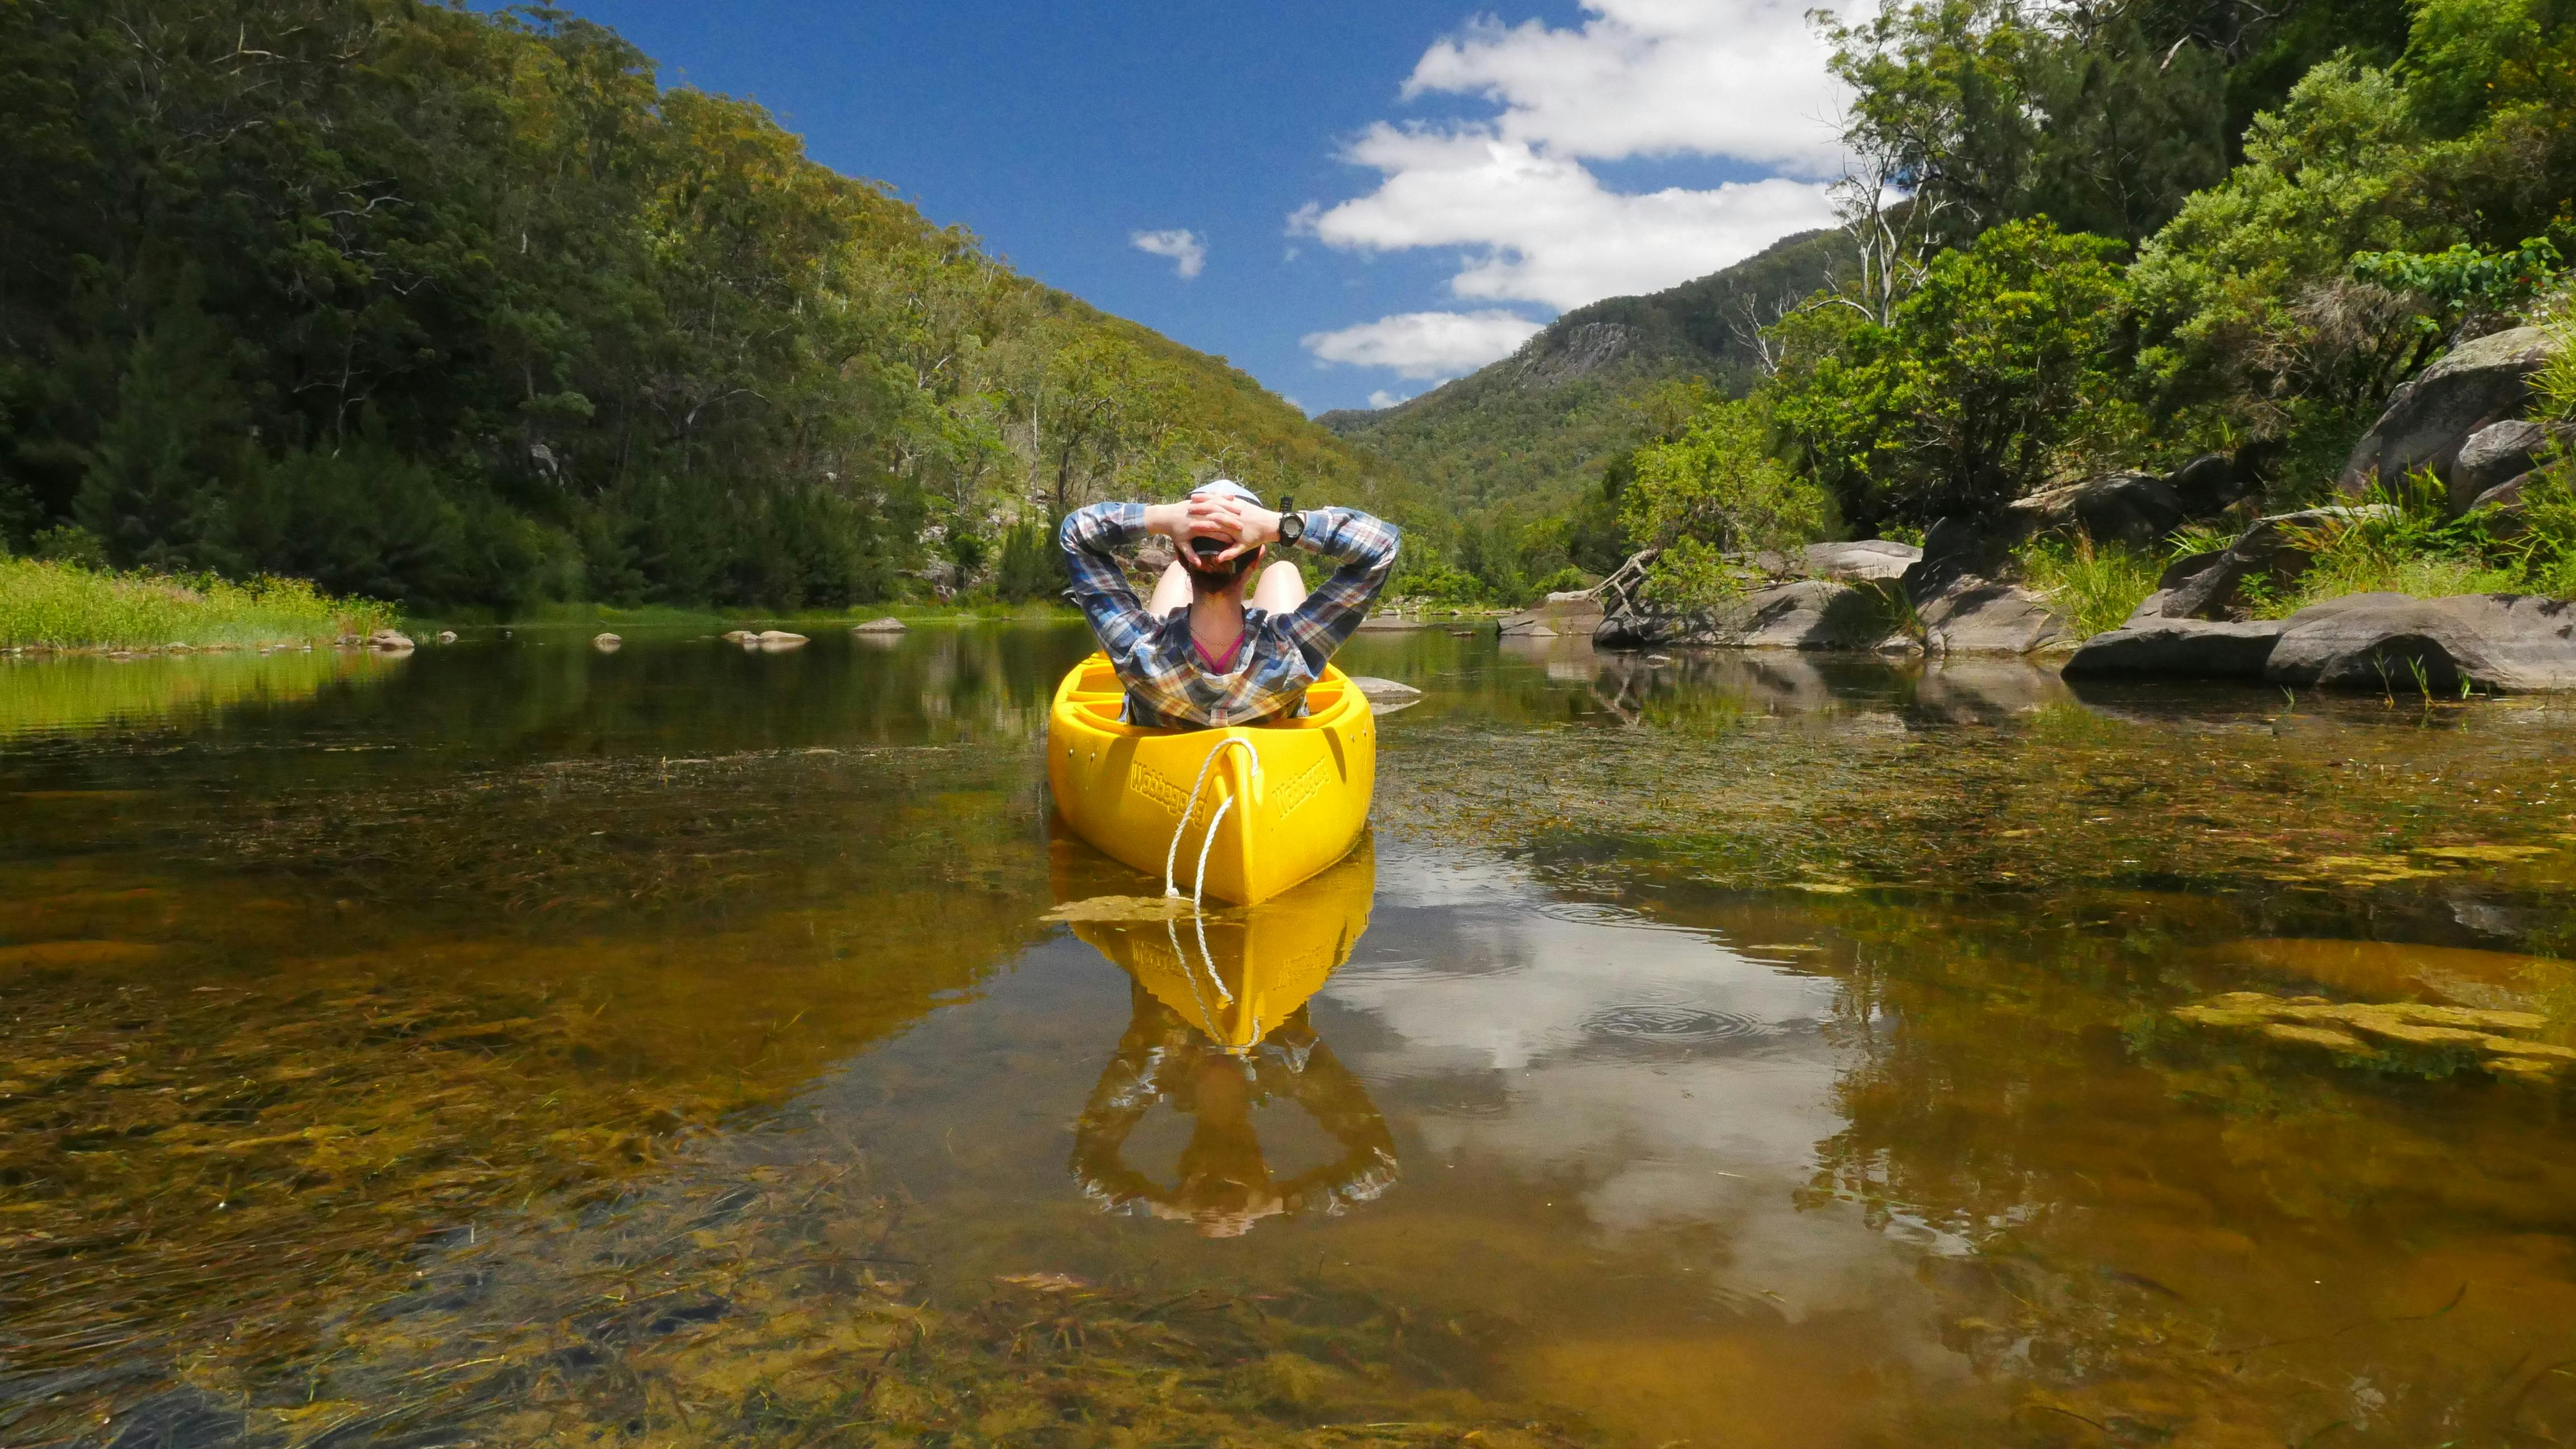 Journey Outdoors in Nature | NSW Holidays & Accommodation, Things to Do